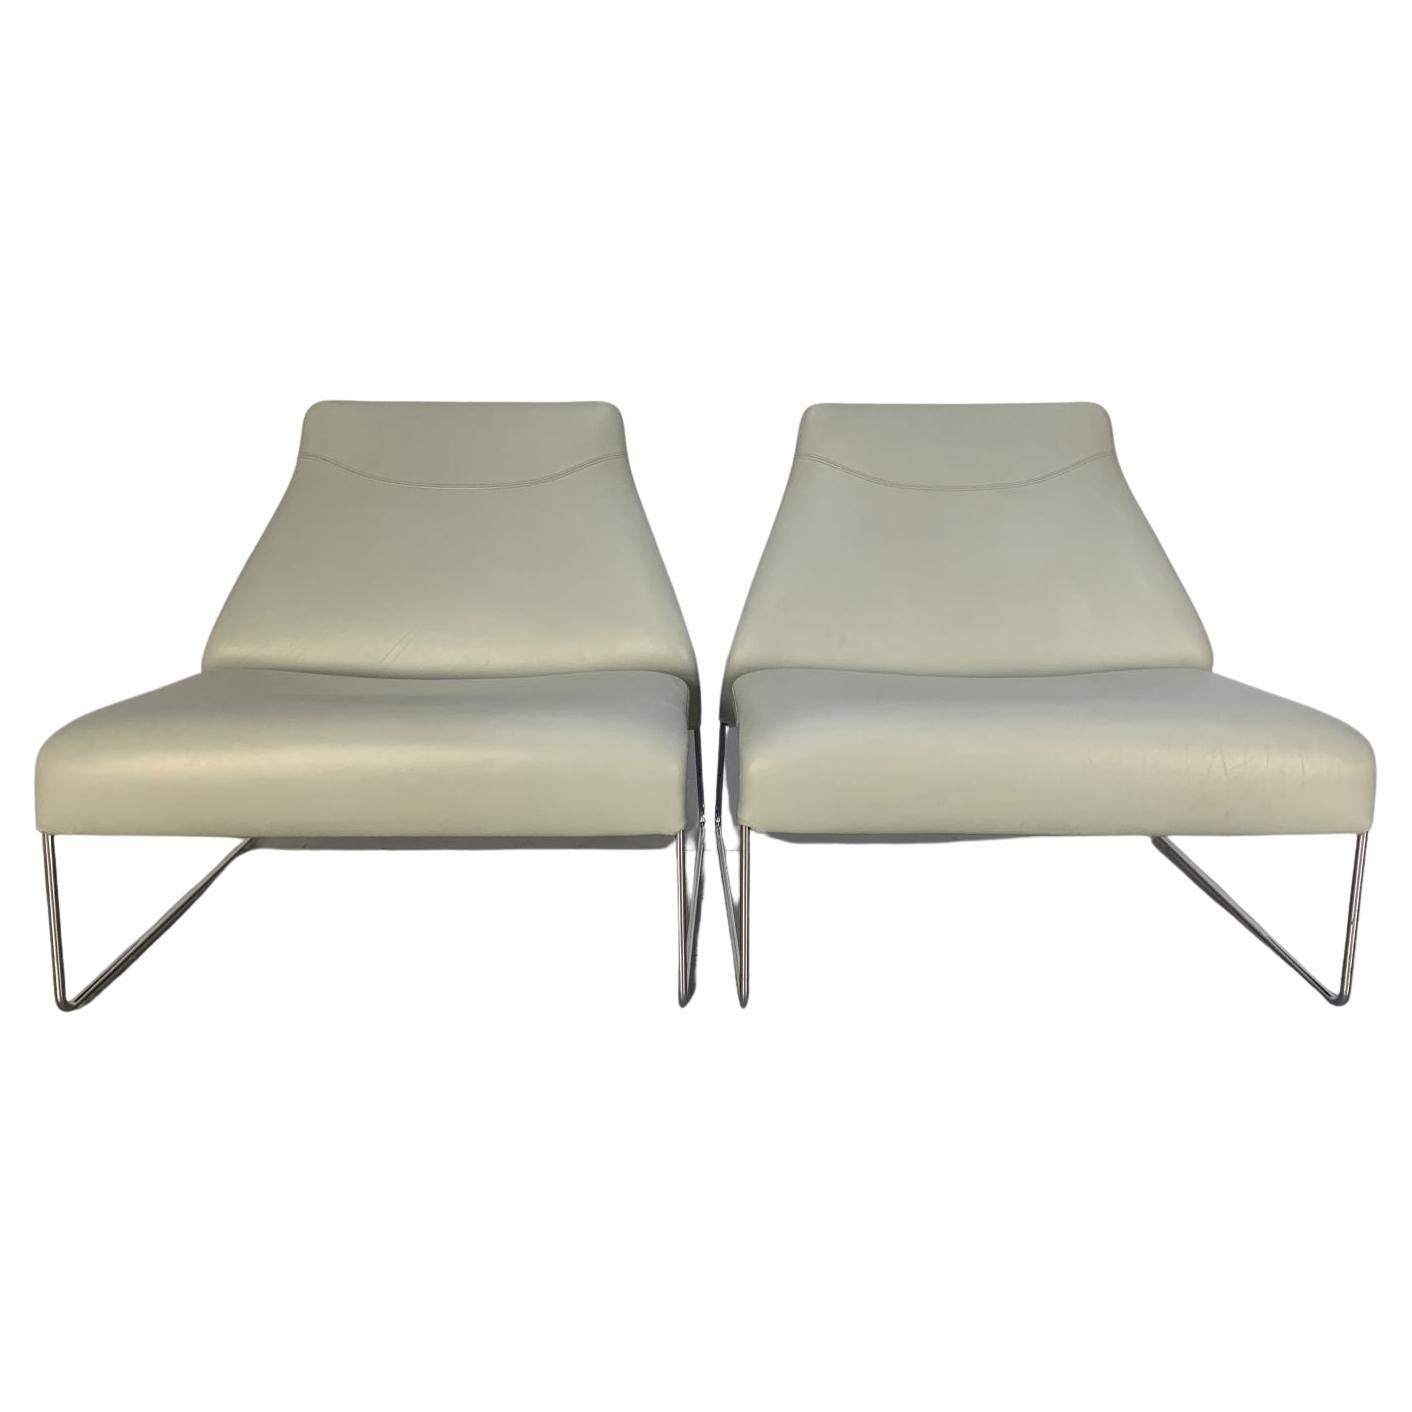 Pair of B&B Italia “Lazy “05” Armchairs in Pale Grey Blue “Gamma” Leather For Sale